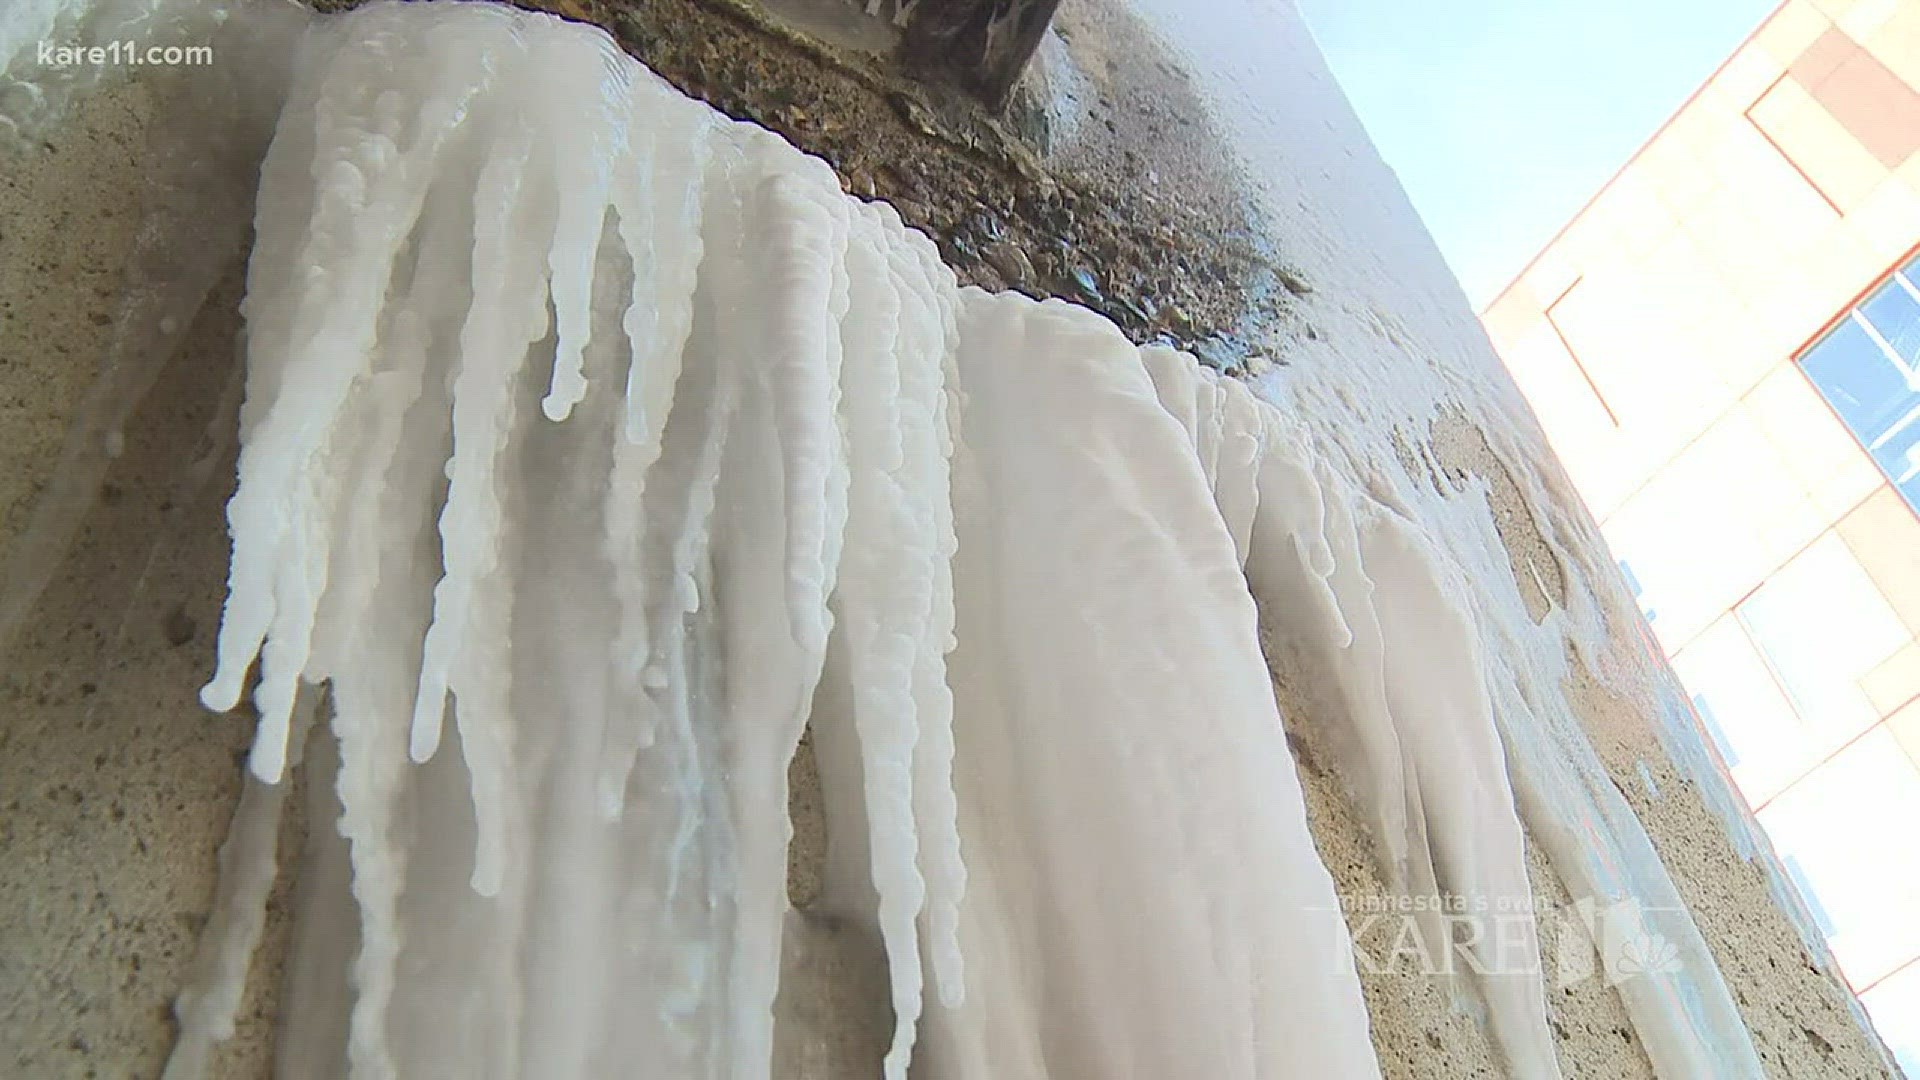 Emergency room doctors in the Twin Cities say they've had lots of patients coming in with injuries related to our dangerously cold weather. Some concerns are frost bite, breathing problems and carbon monoxide poisoning.